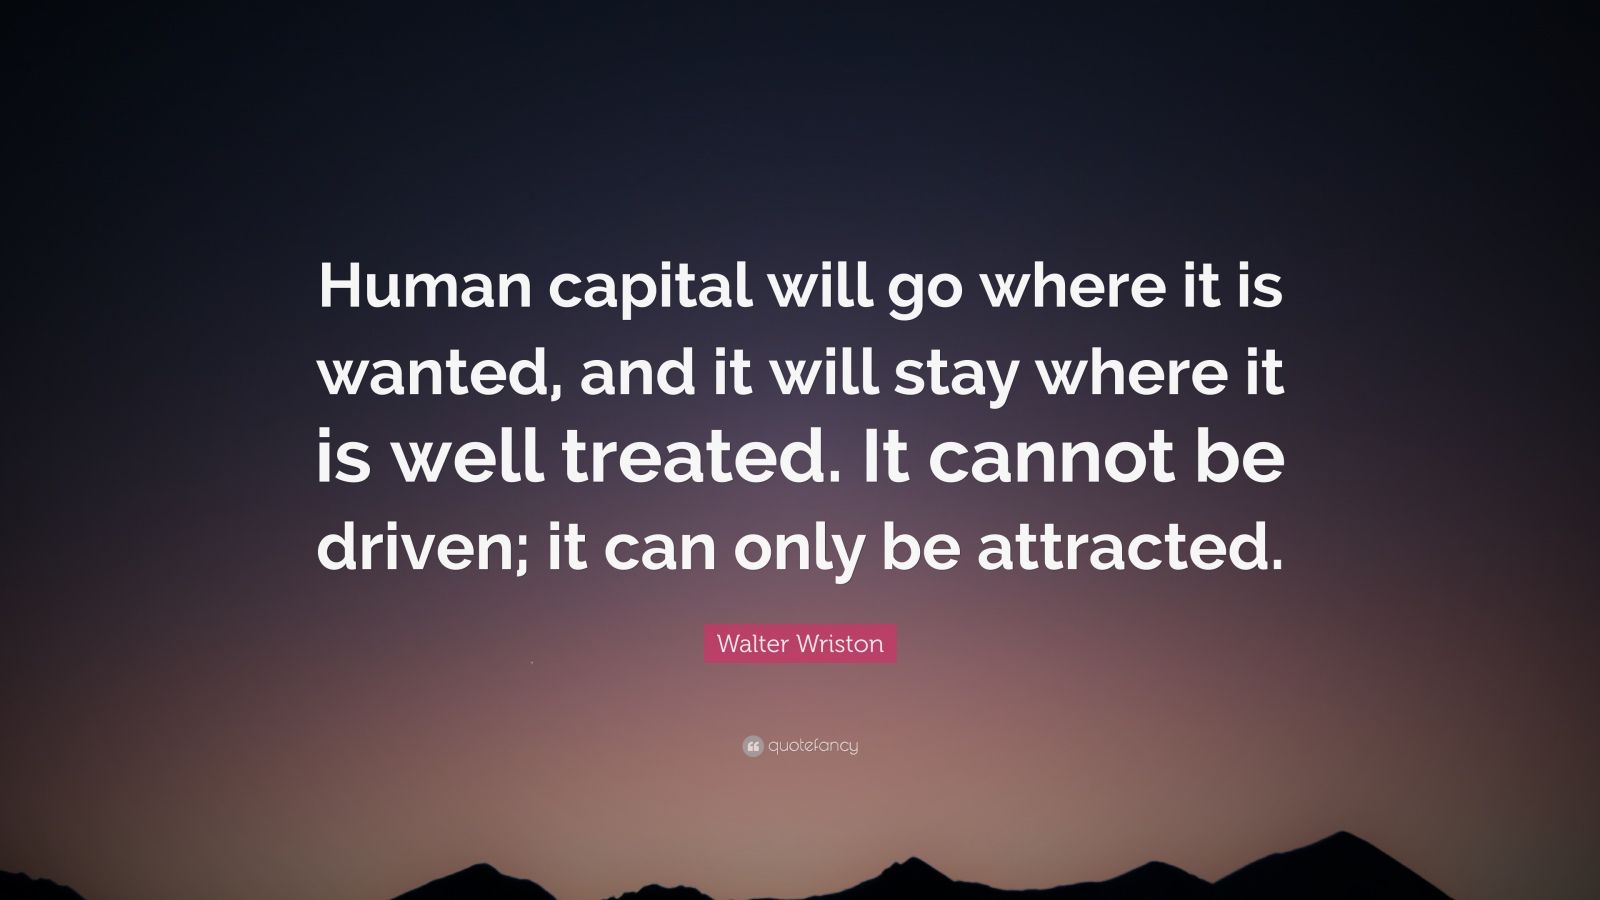 Walter Wriston Quote: “Human capital will go where it is wanted, and it ... Human Capital